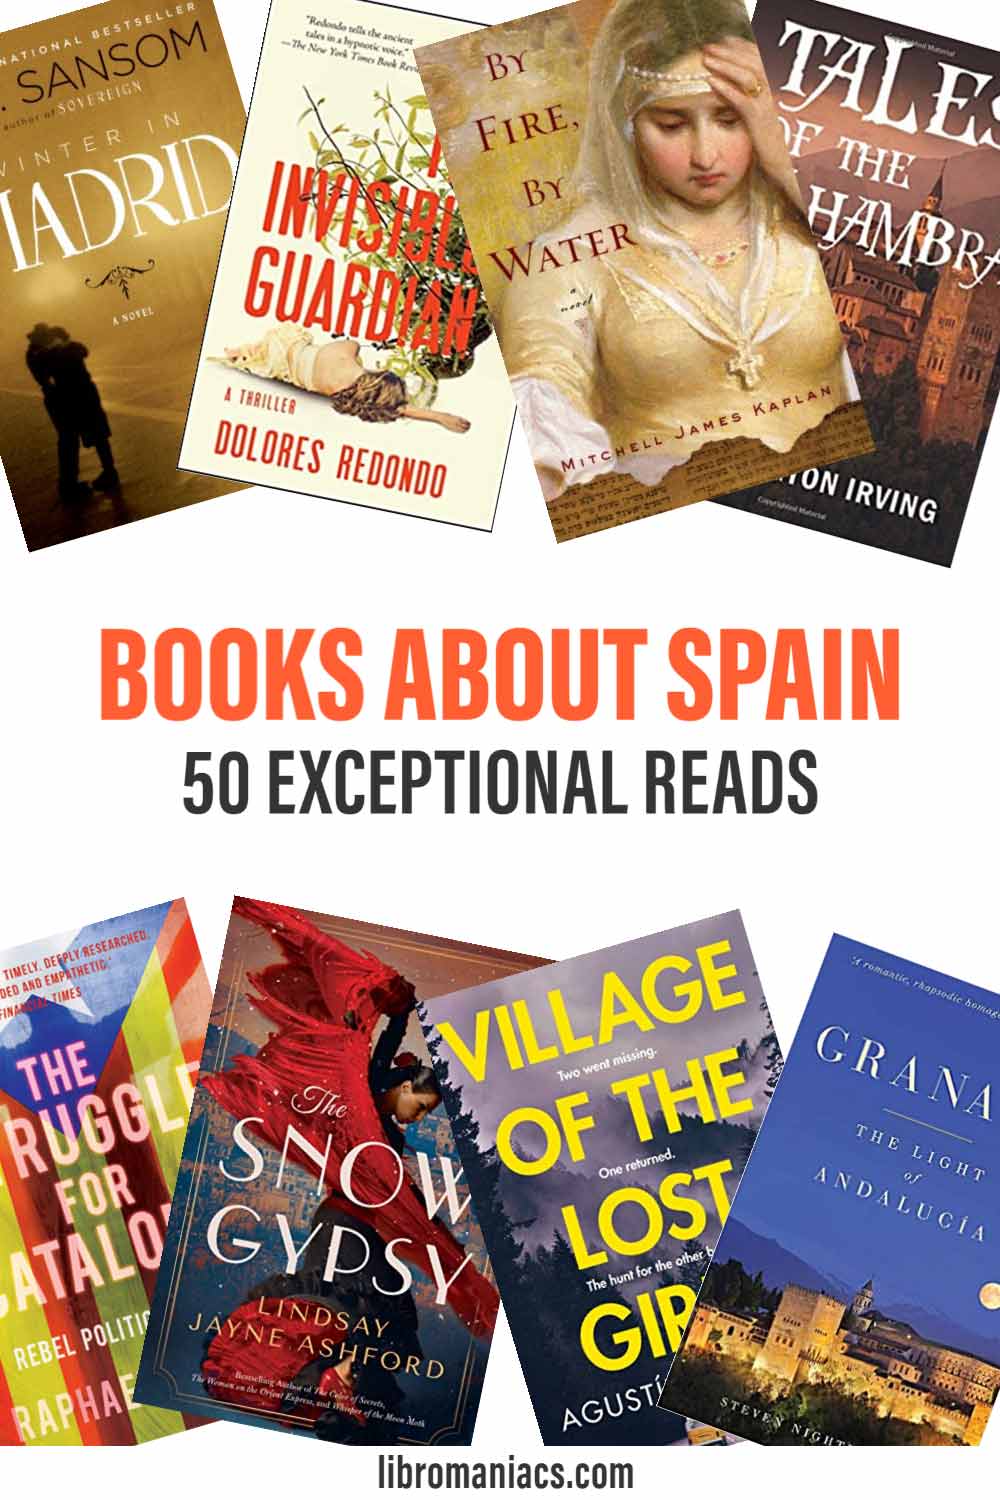 Books about Spain. 50 exceptional reads